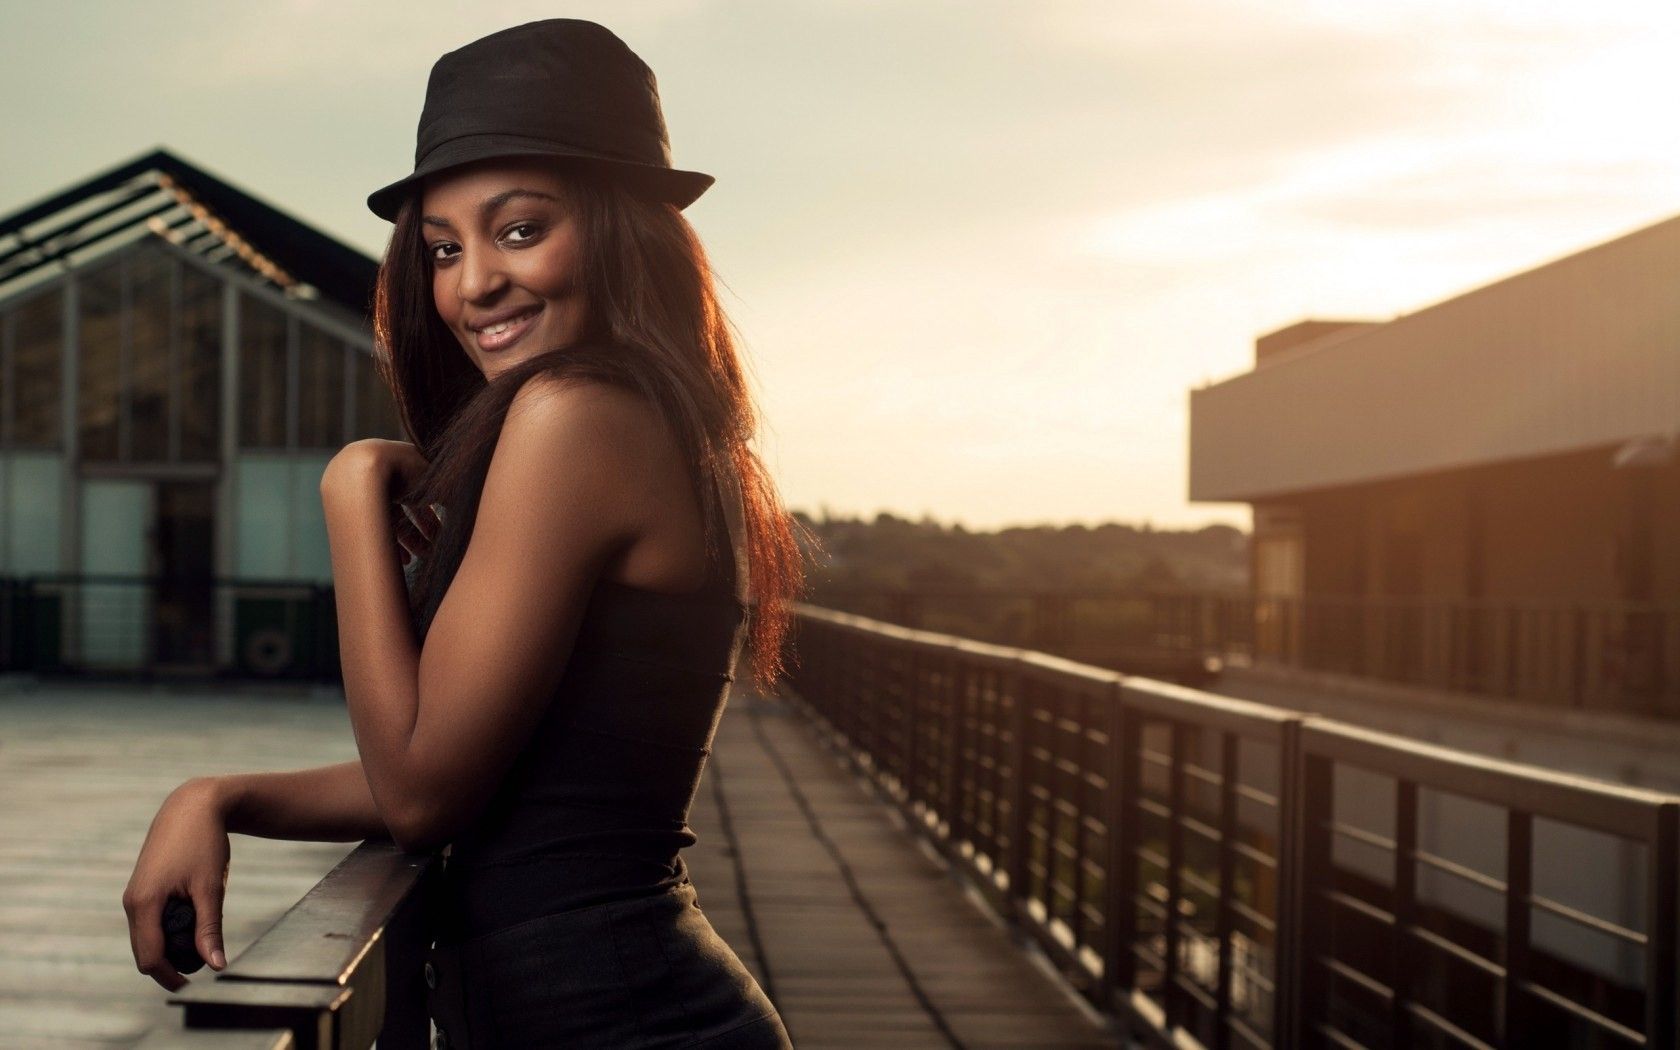 Black girl on the bridge wallpapers and images - wallpapers